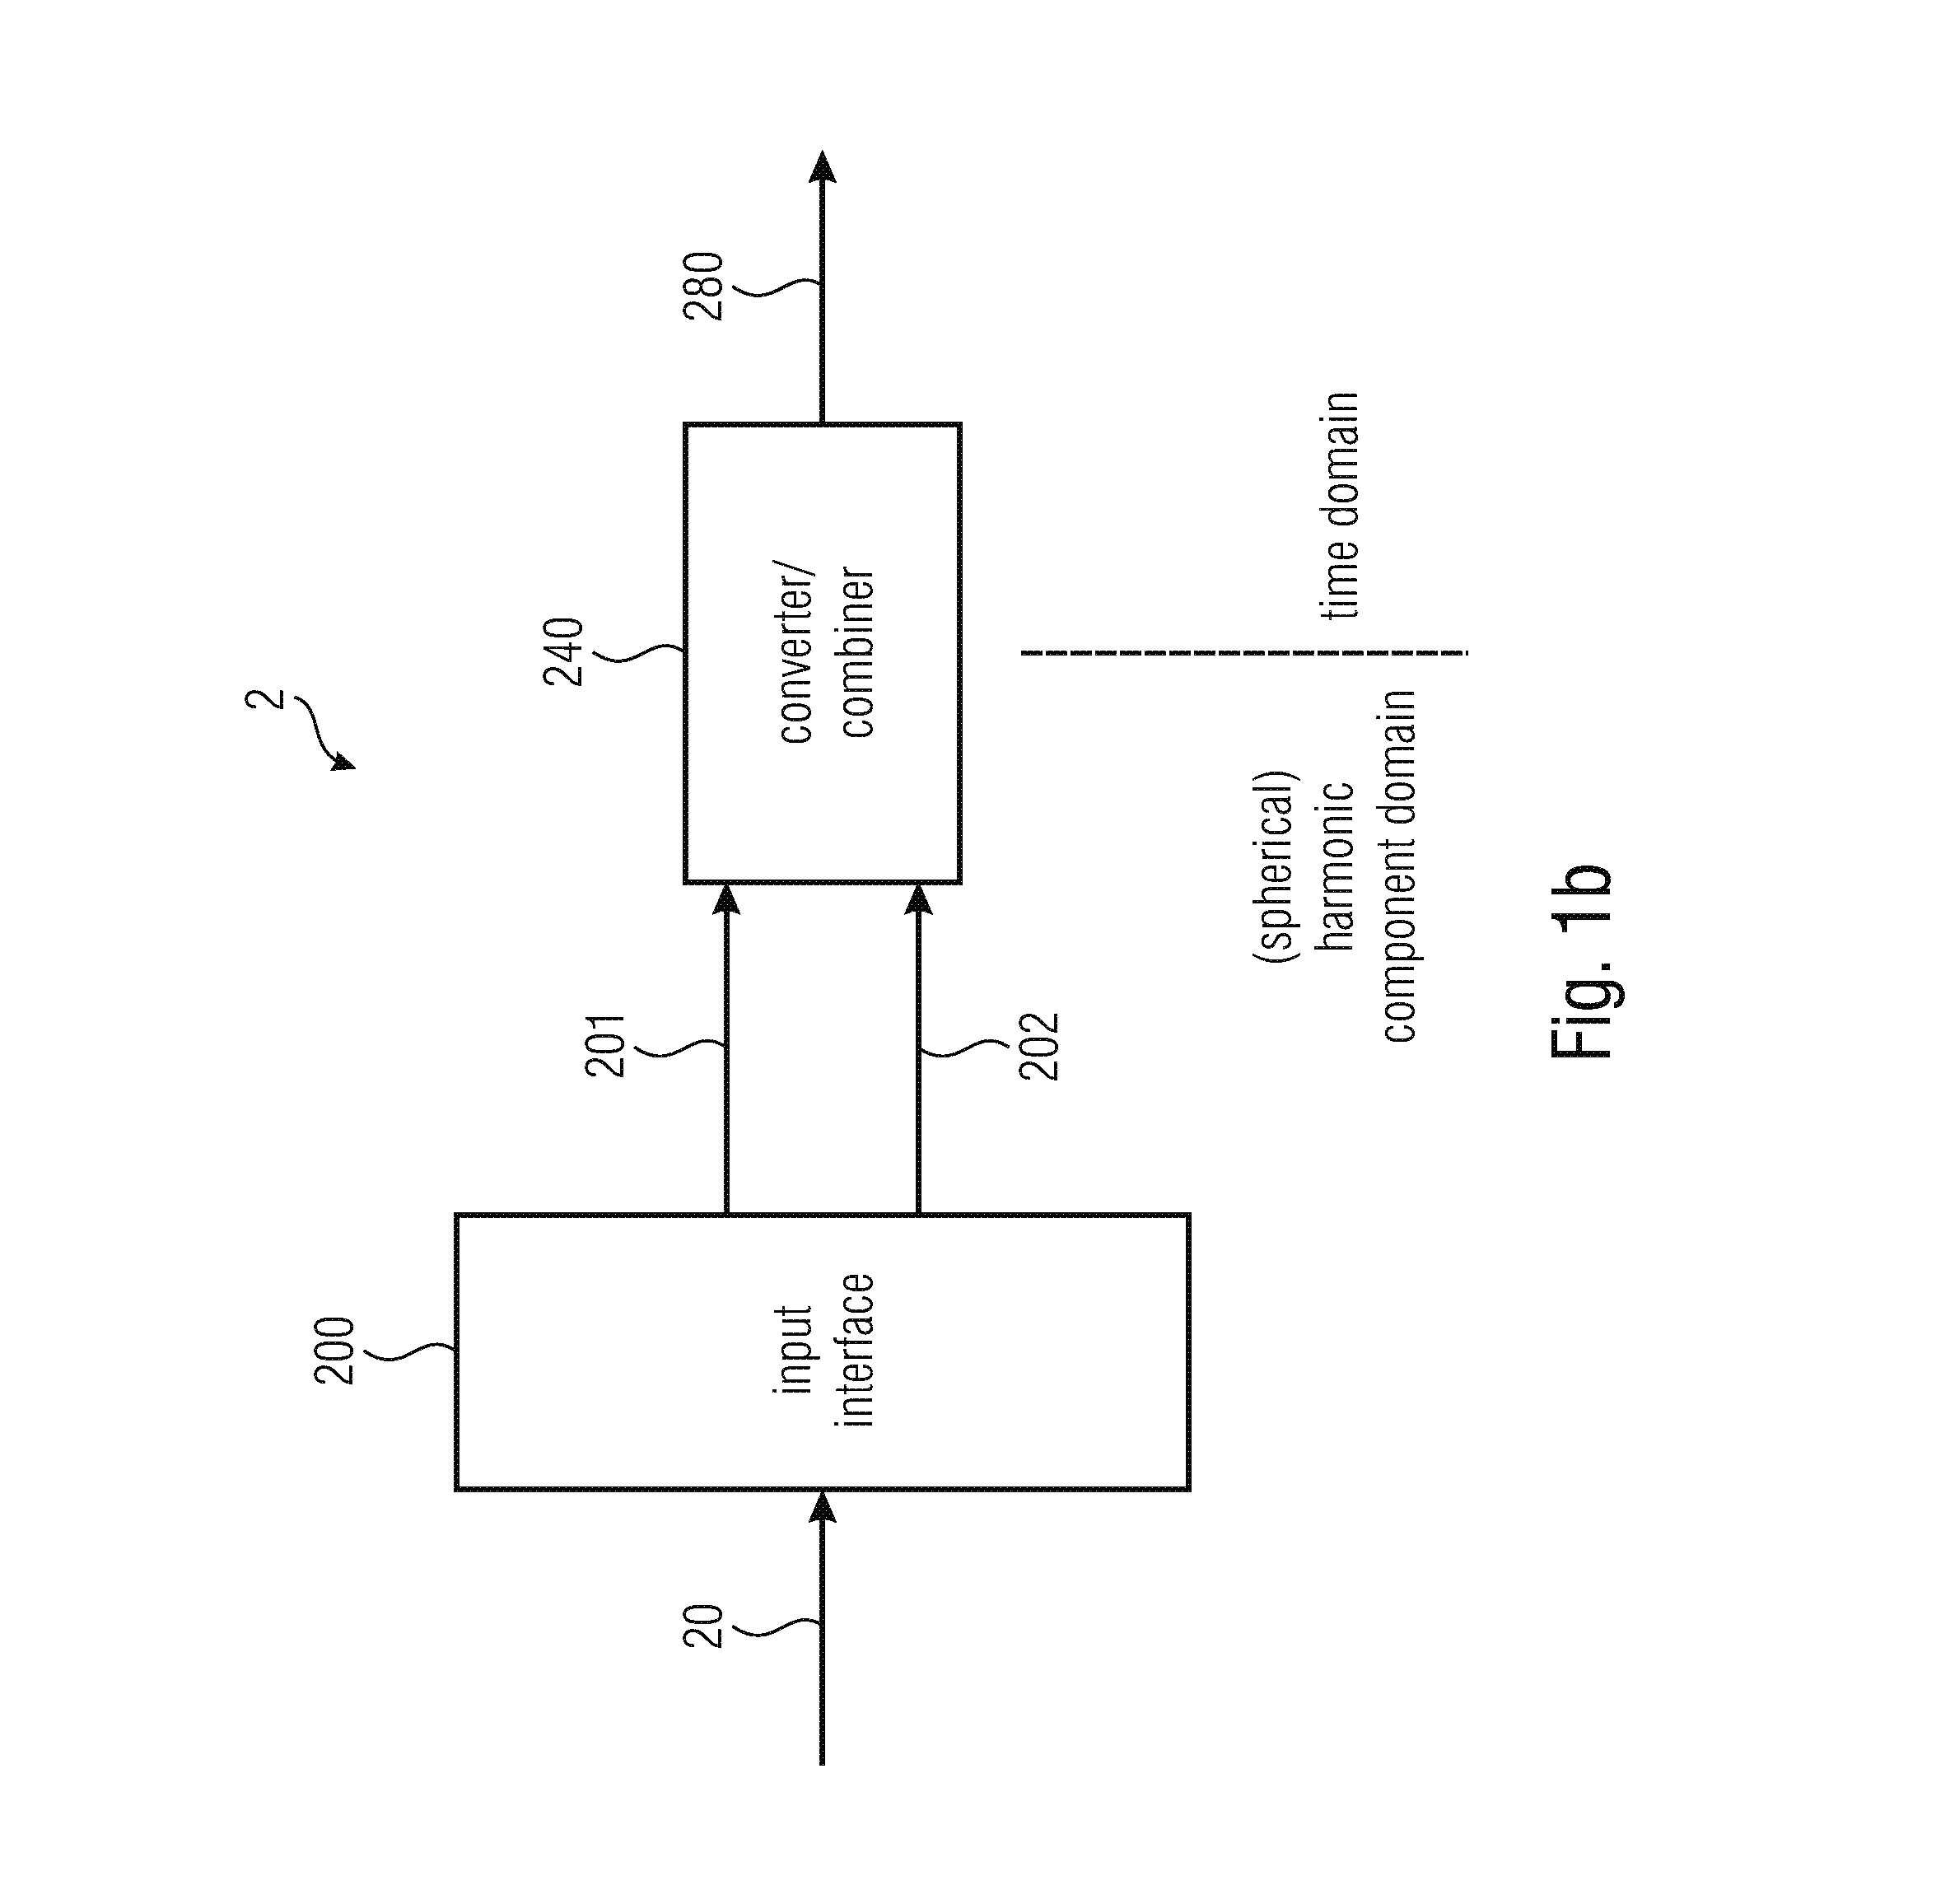 Method and apparatus for compressing and decompressing sound field data of an area